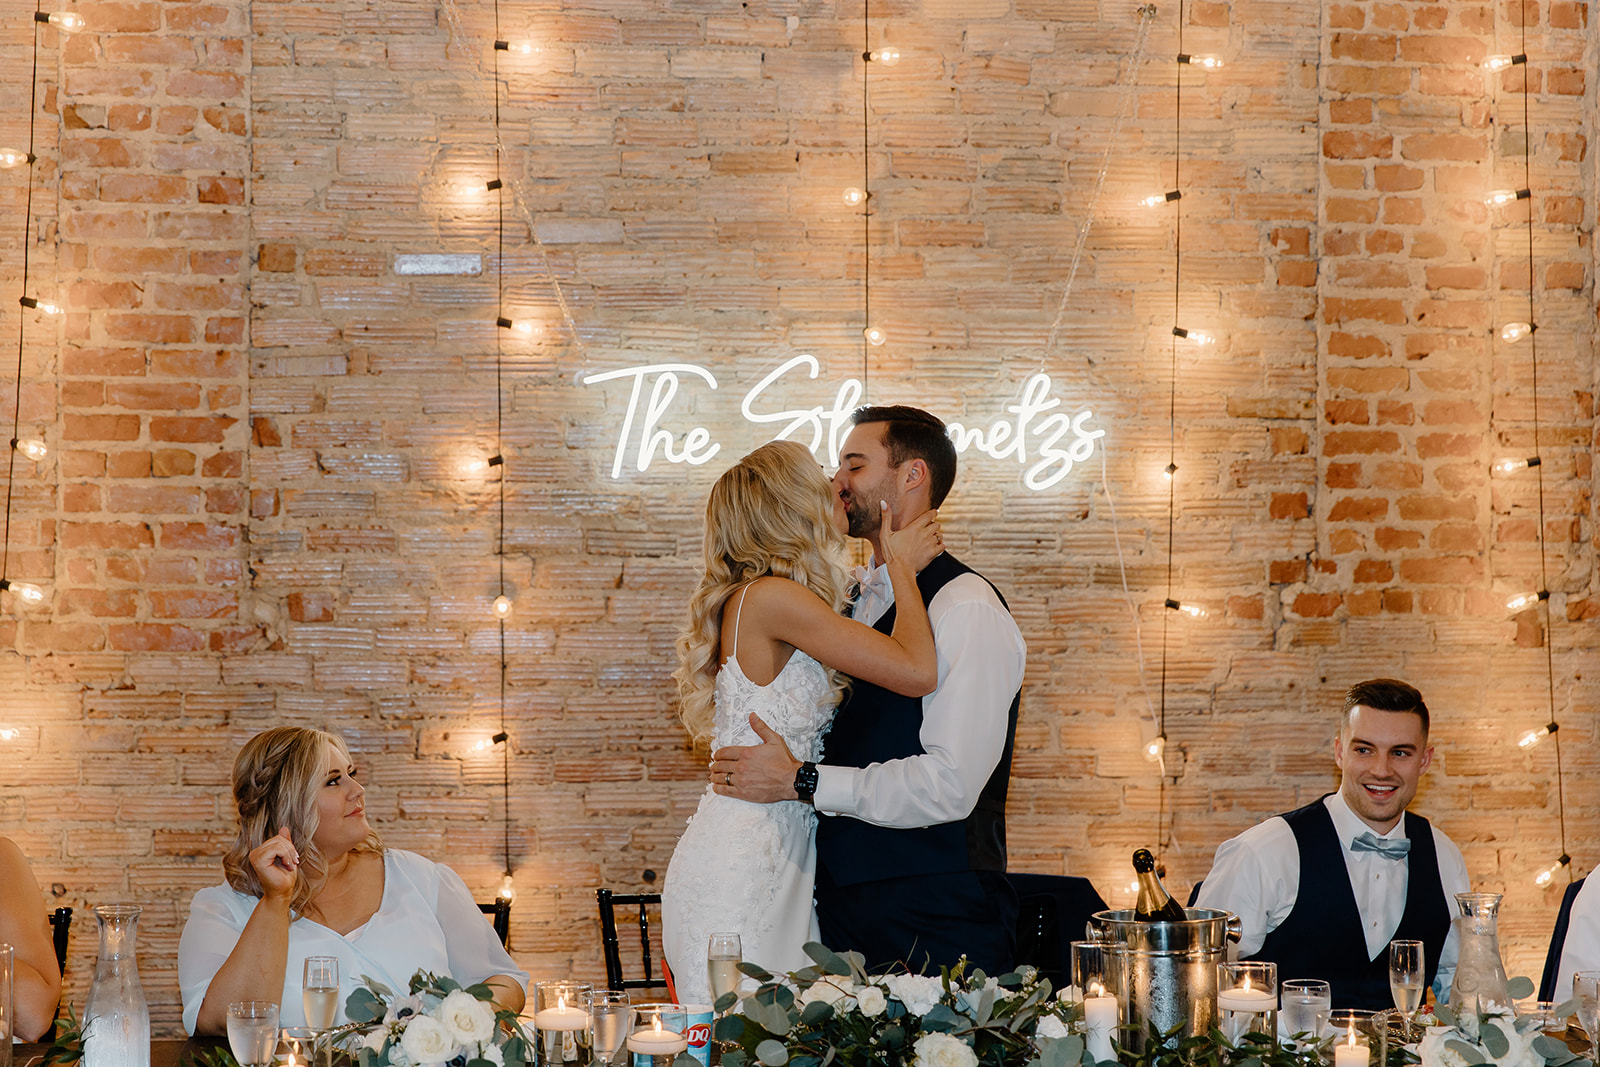 Bride and groom share a kiss in front of their neon sign on their wedding day.